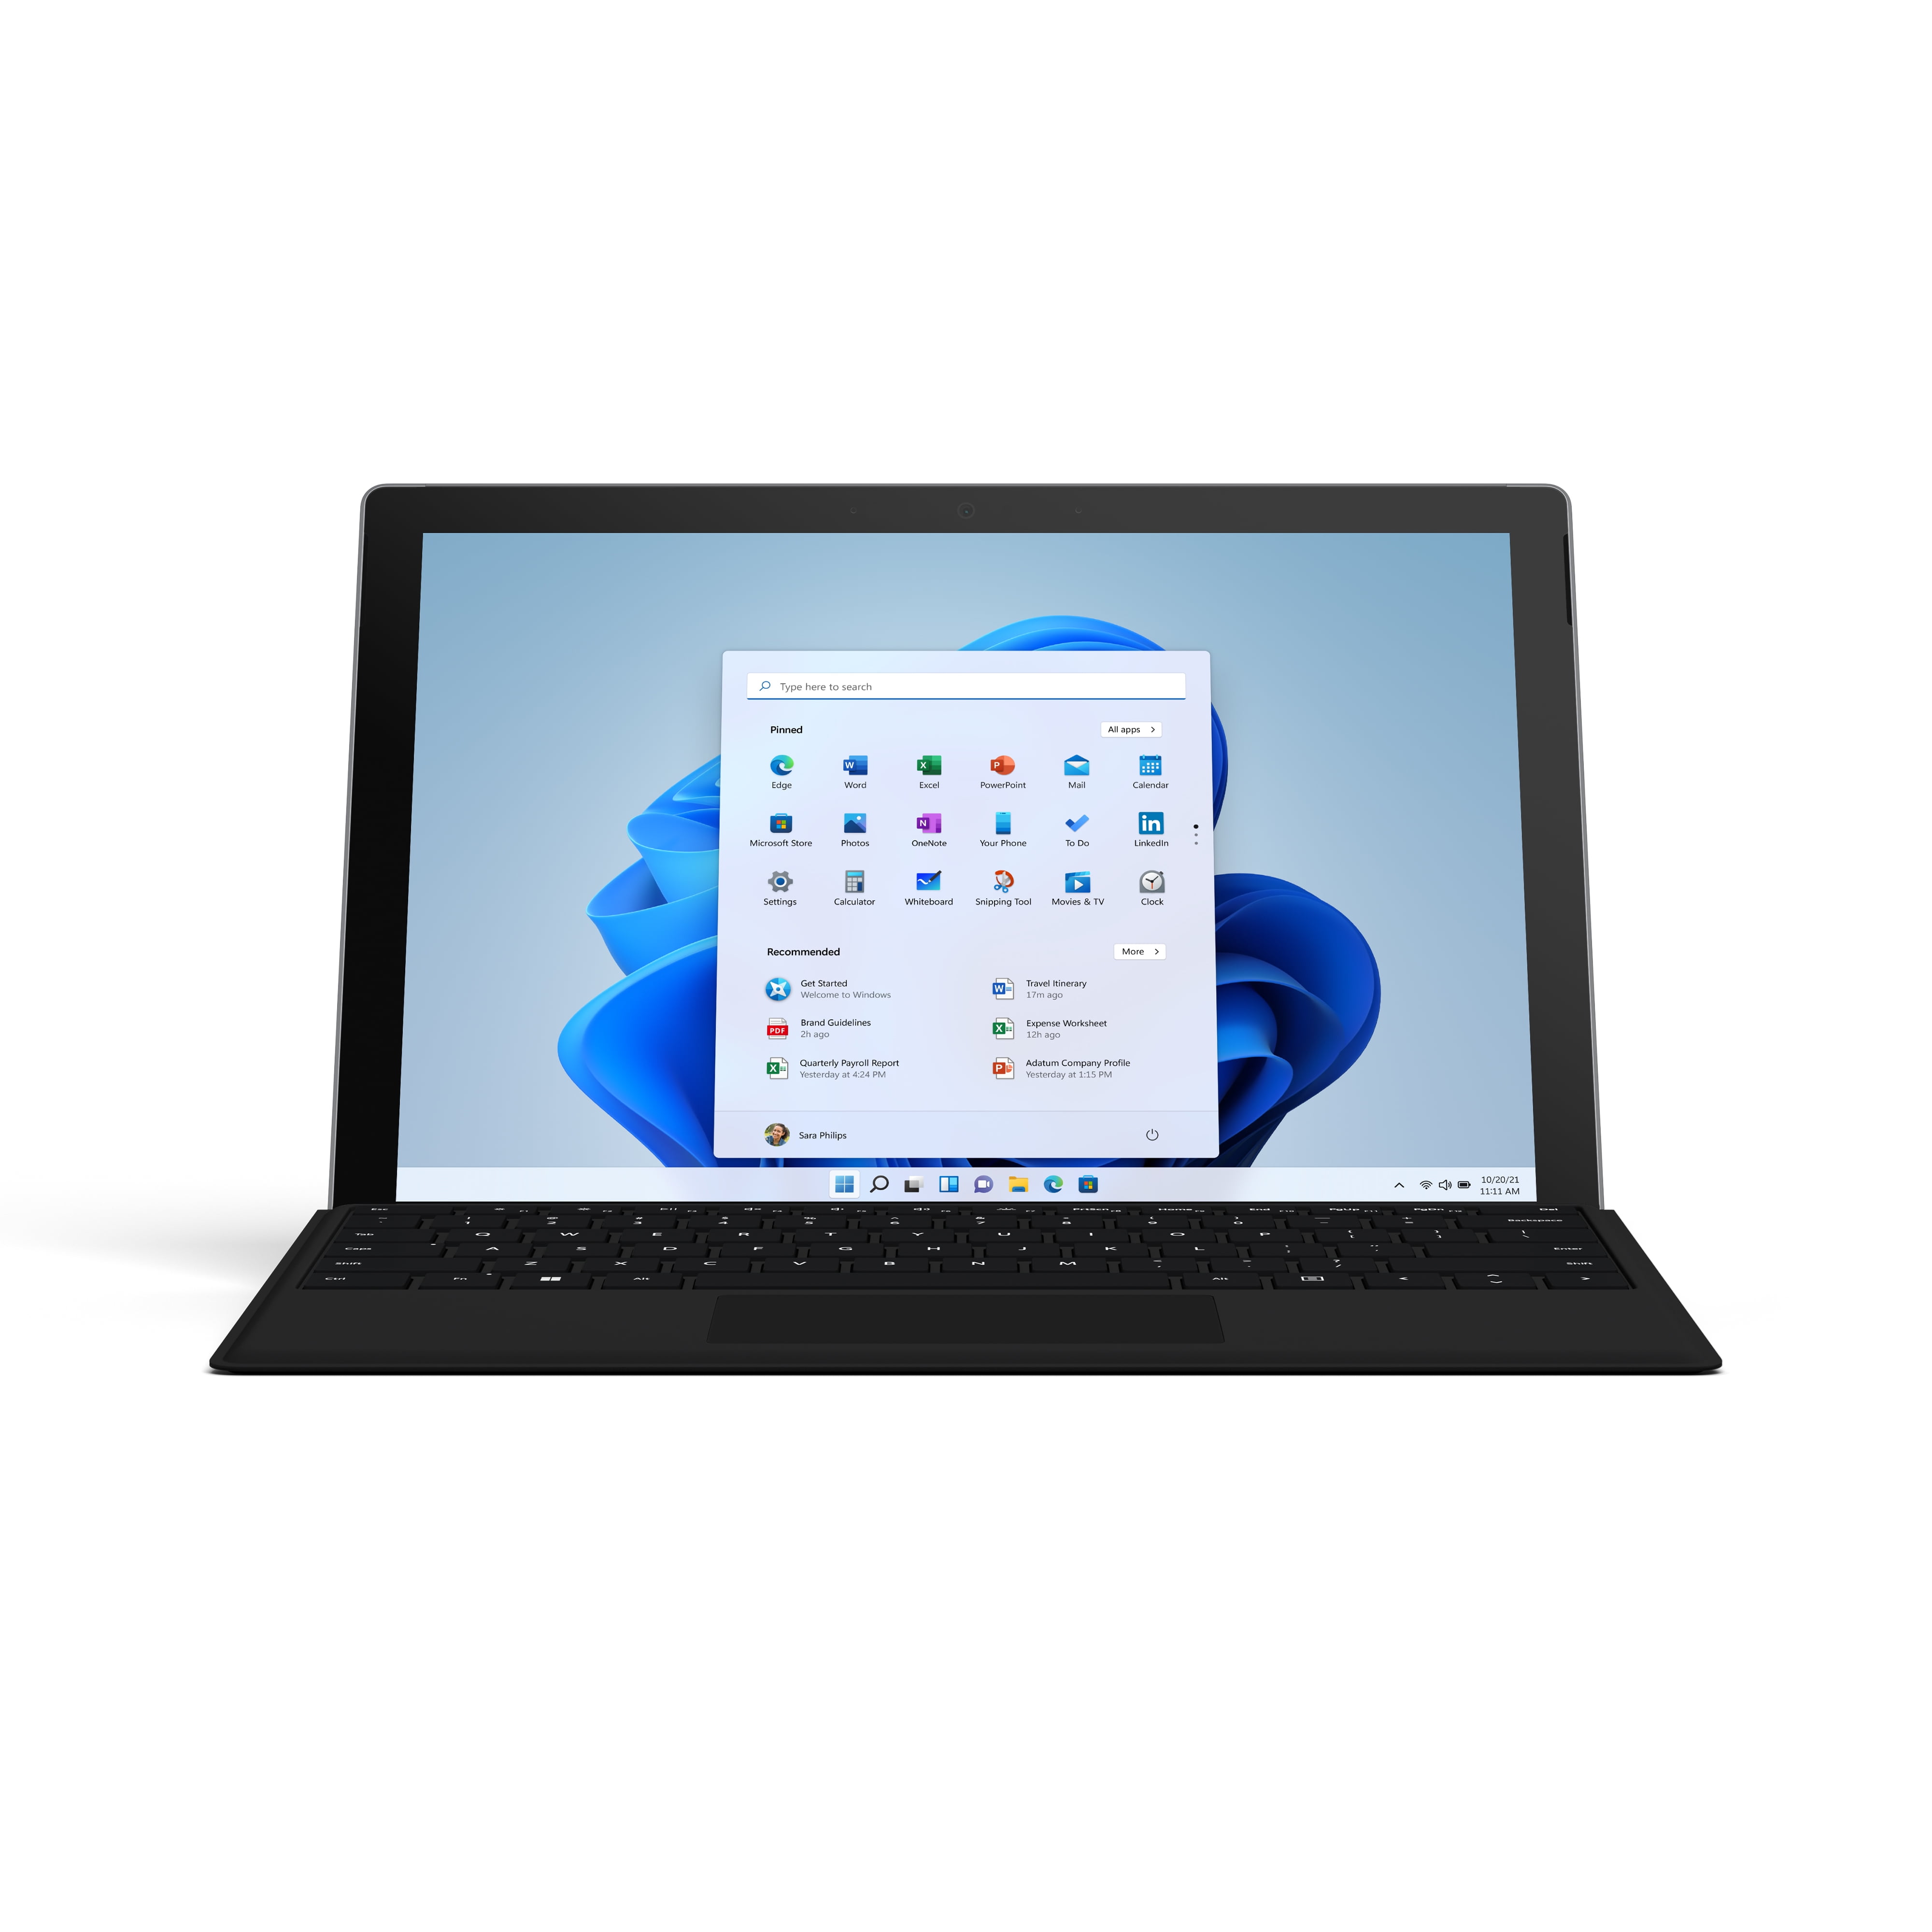 Microsoft Surface Pro 7+ 2-In-1, 12.3" Touch Screen, Intel Core i3, 8GB RAM, 128GB SSD, Windows 11 Home, Platinum, with Black Type Cover - Walmart